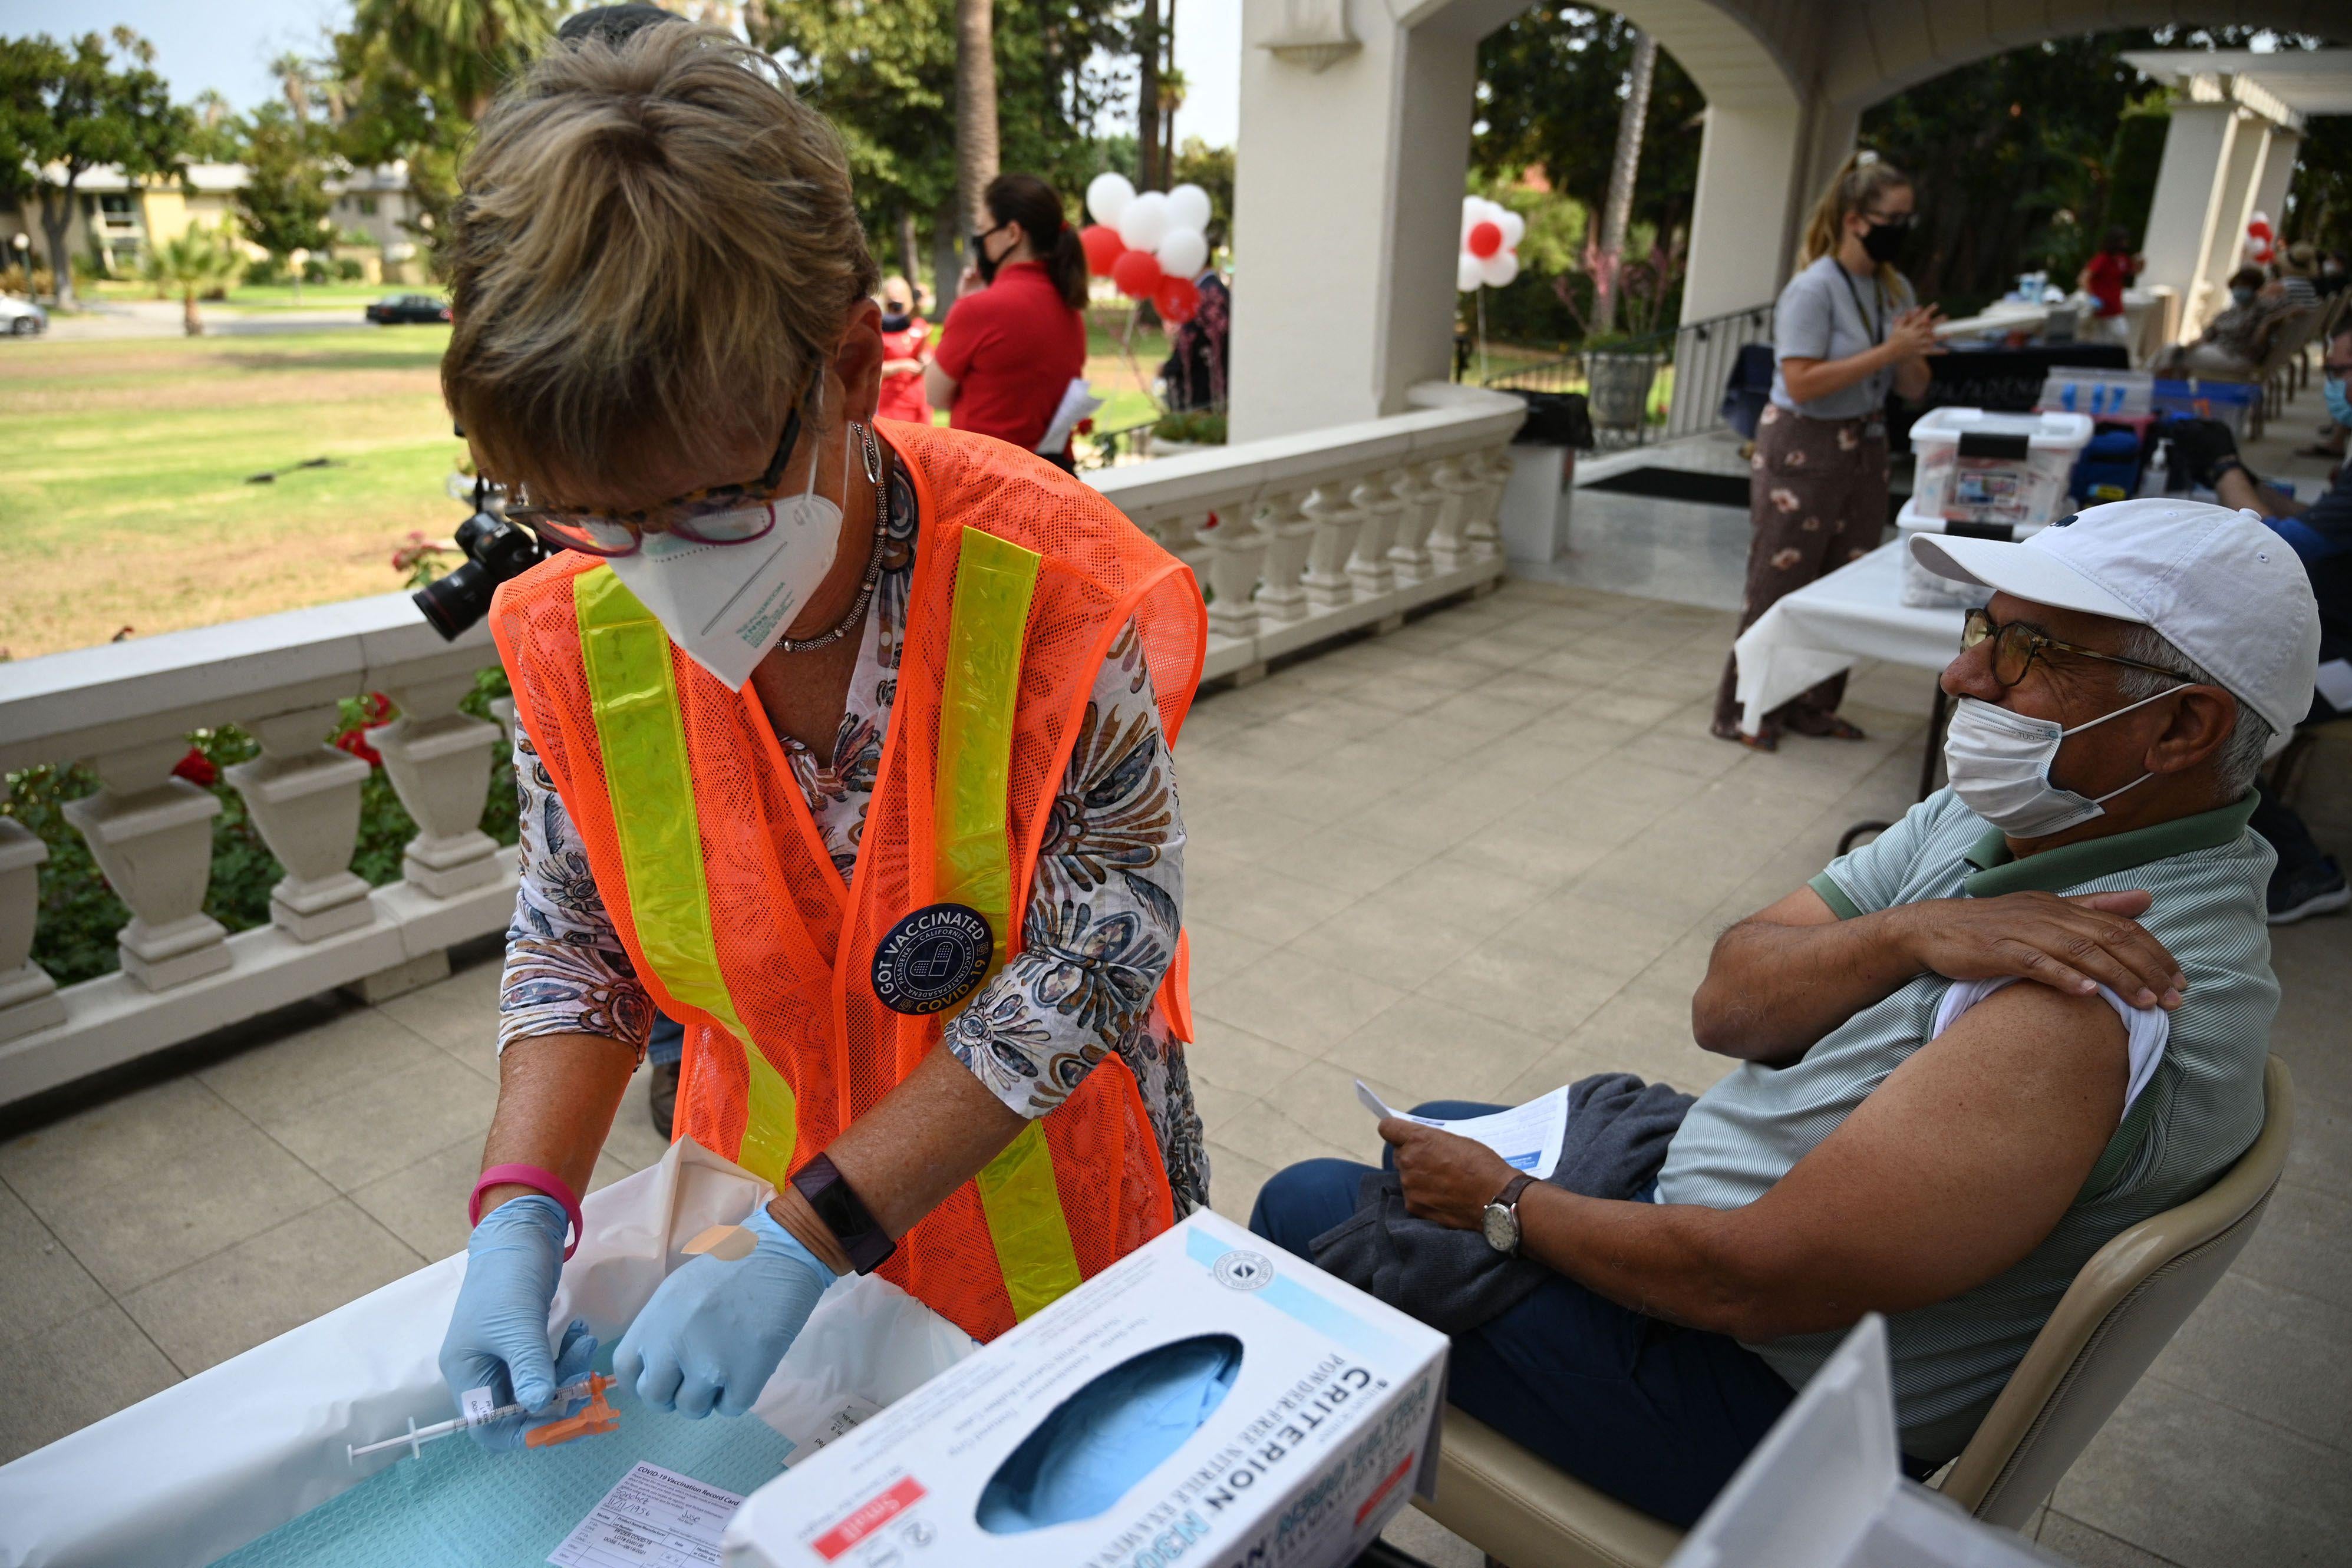 A nurse prepares a booster shot of the Pfizer vaccine at a clinic in Pasadena, California, on August 19.